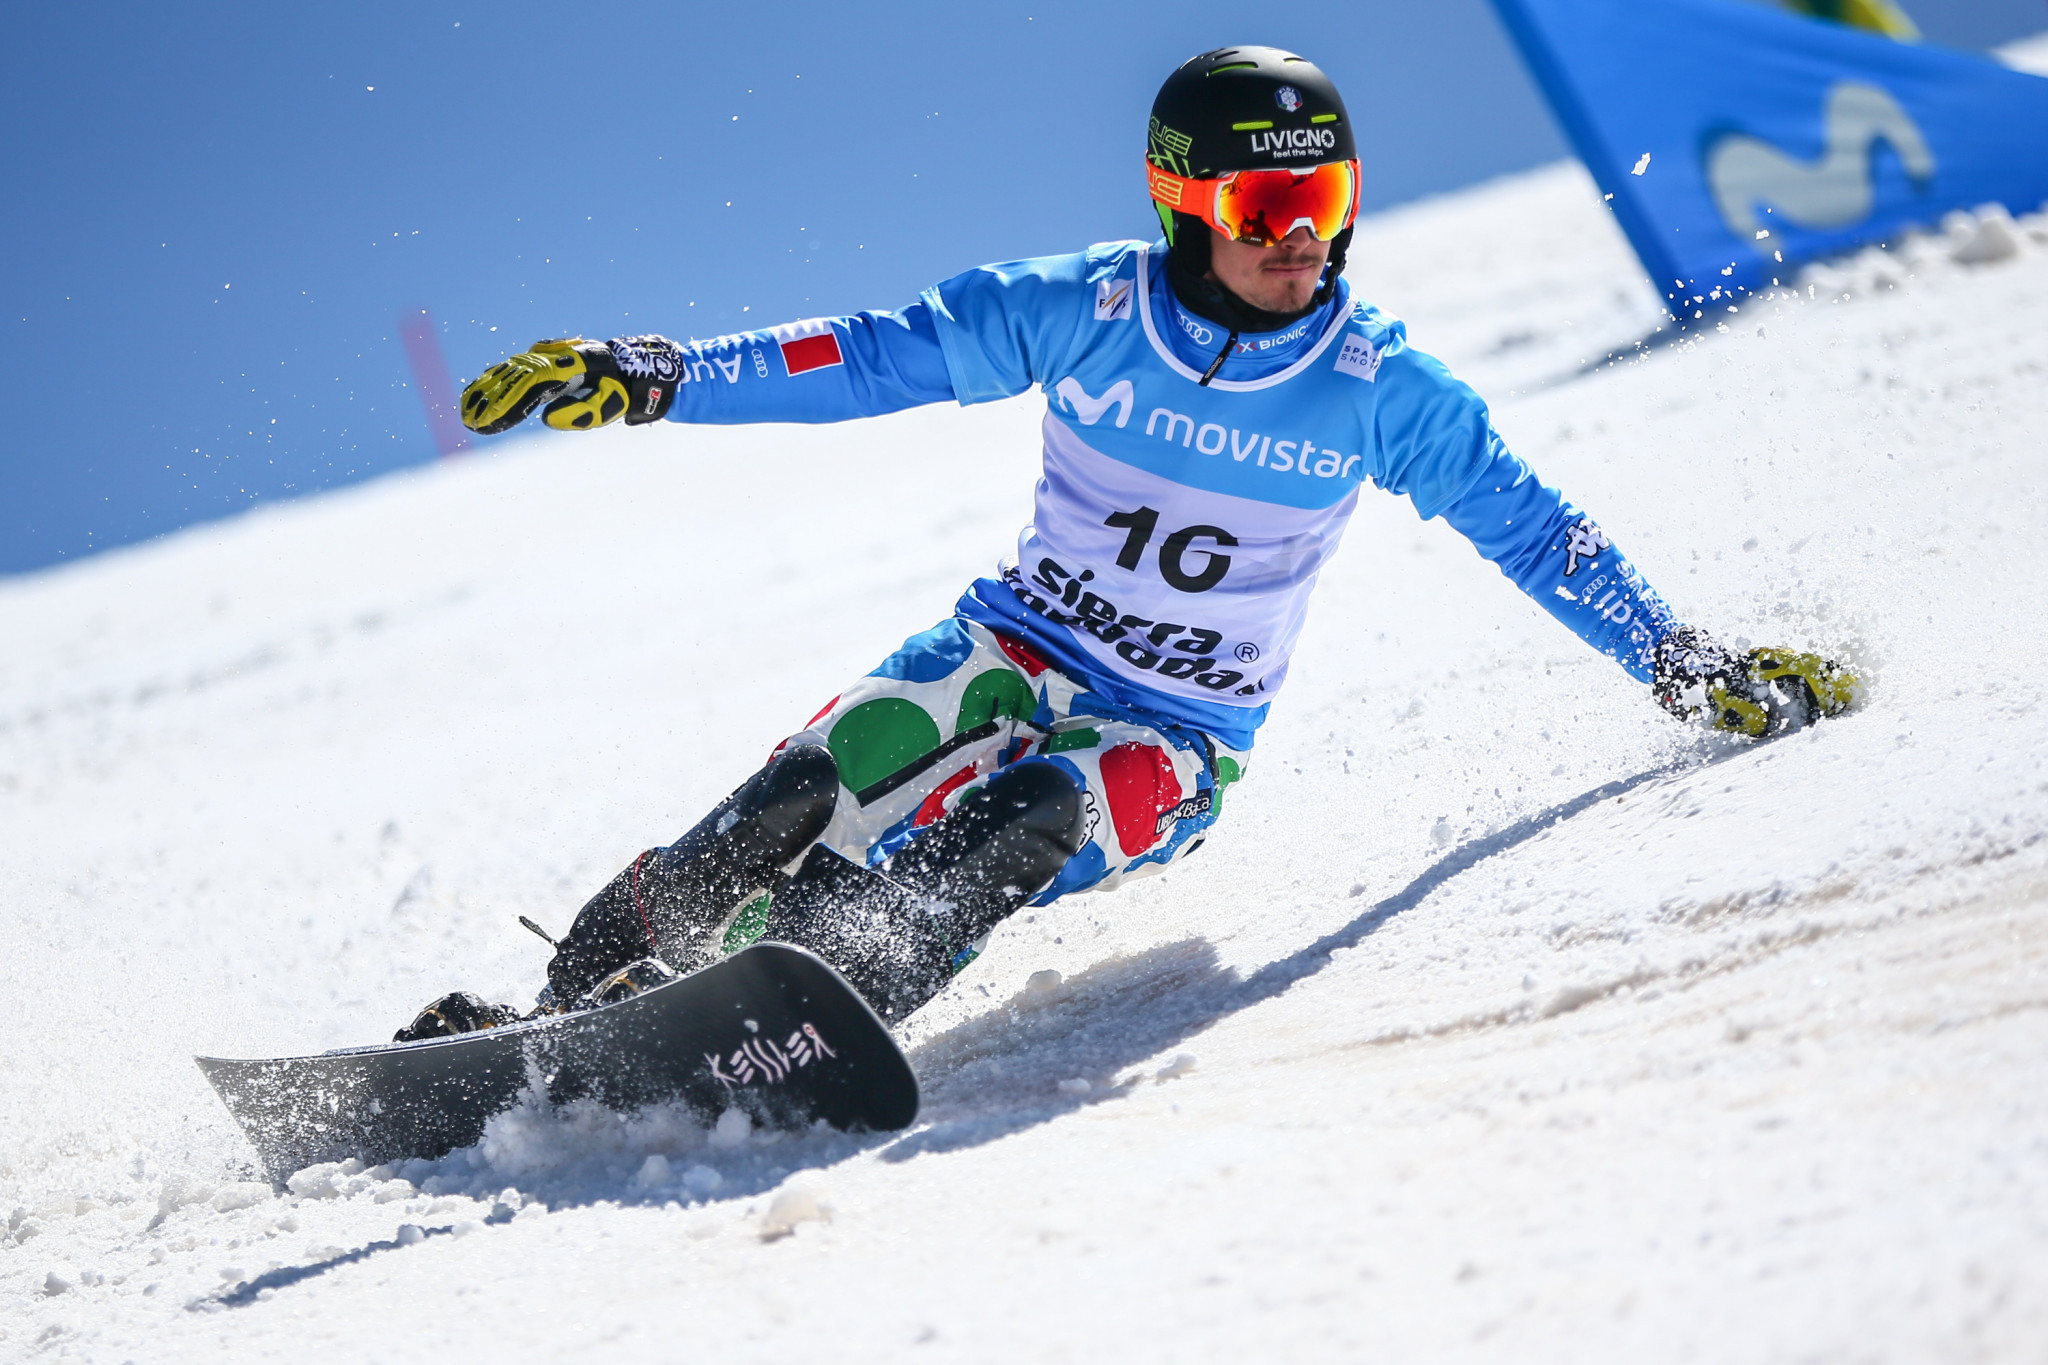 Parallel slalom action continues at FIS Alpine Snowboard World Cup in Piancavallo